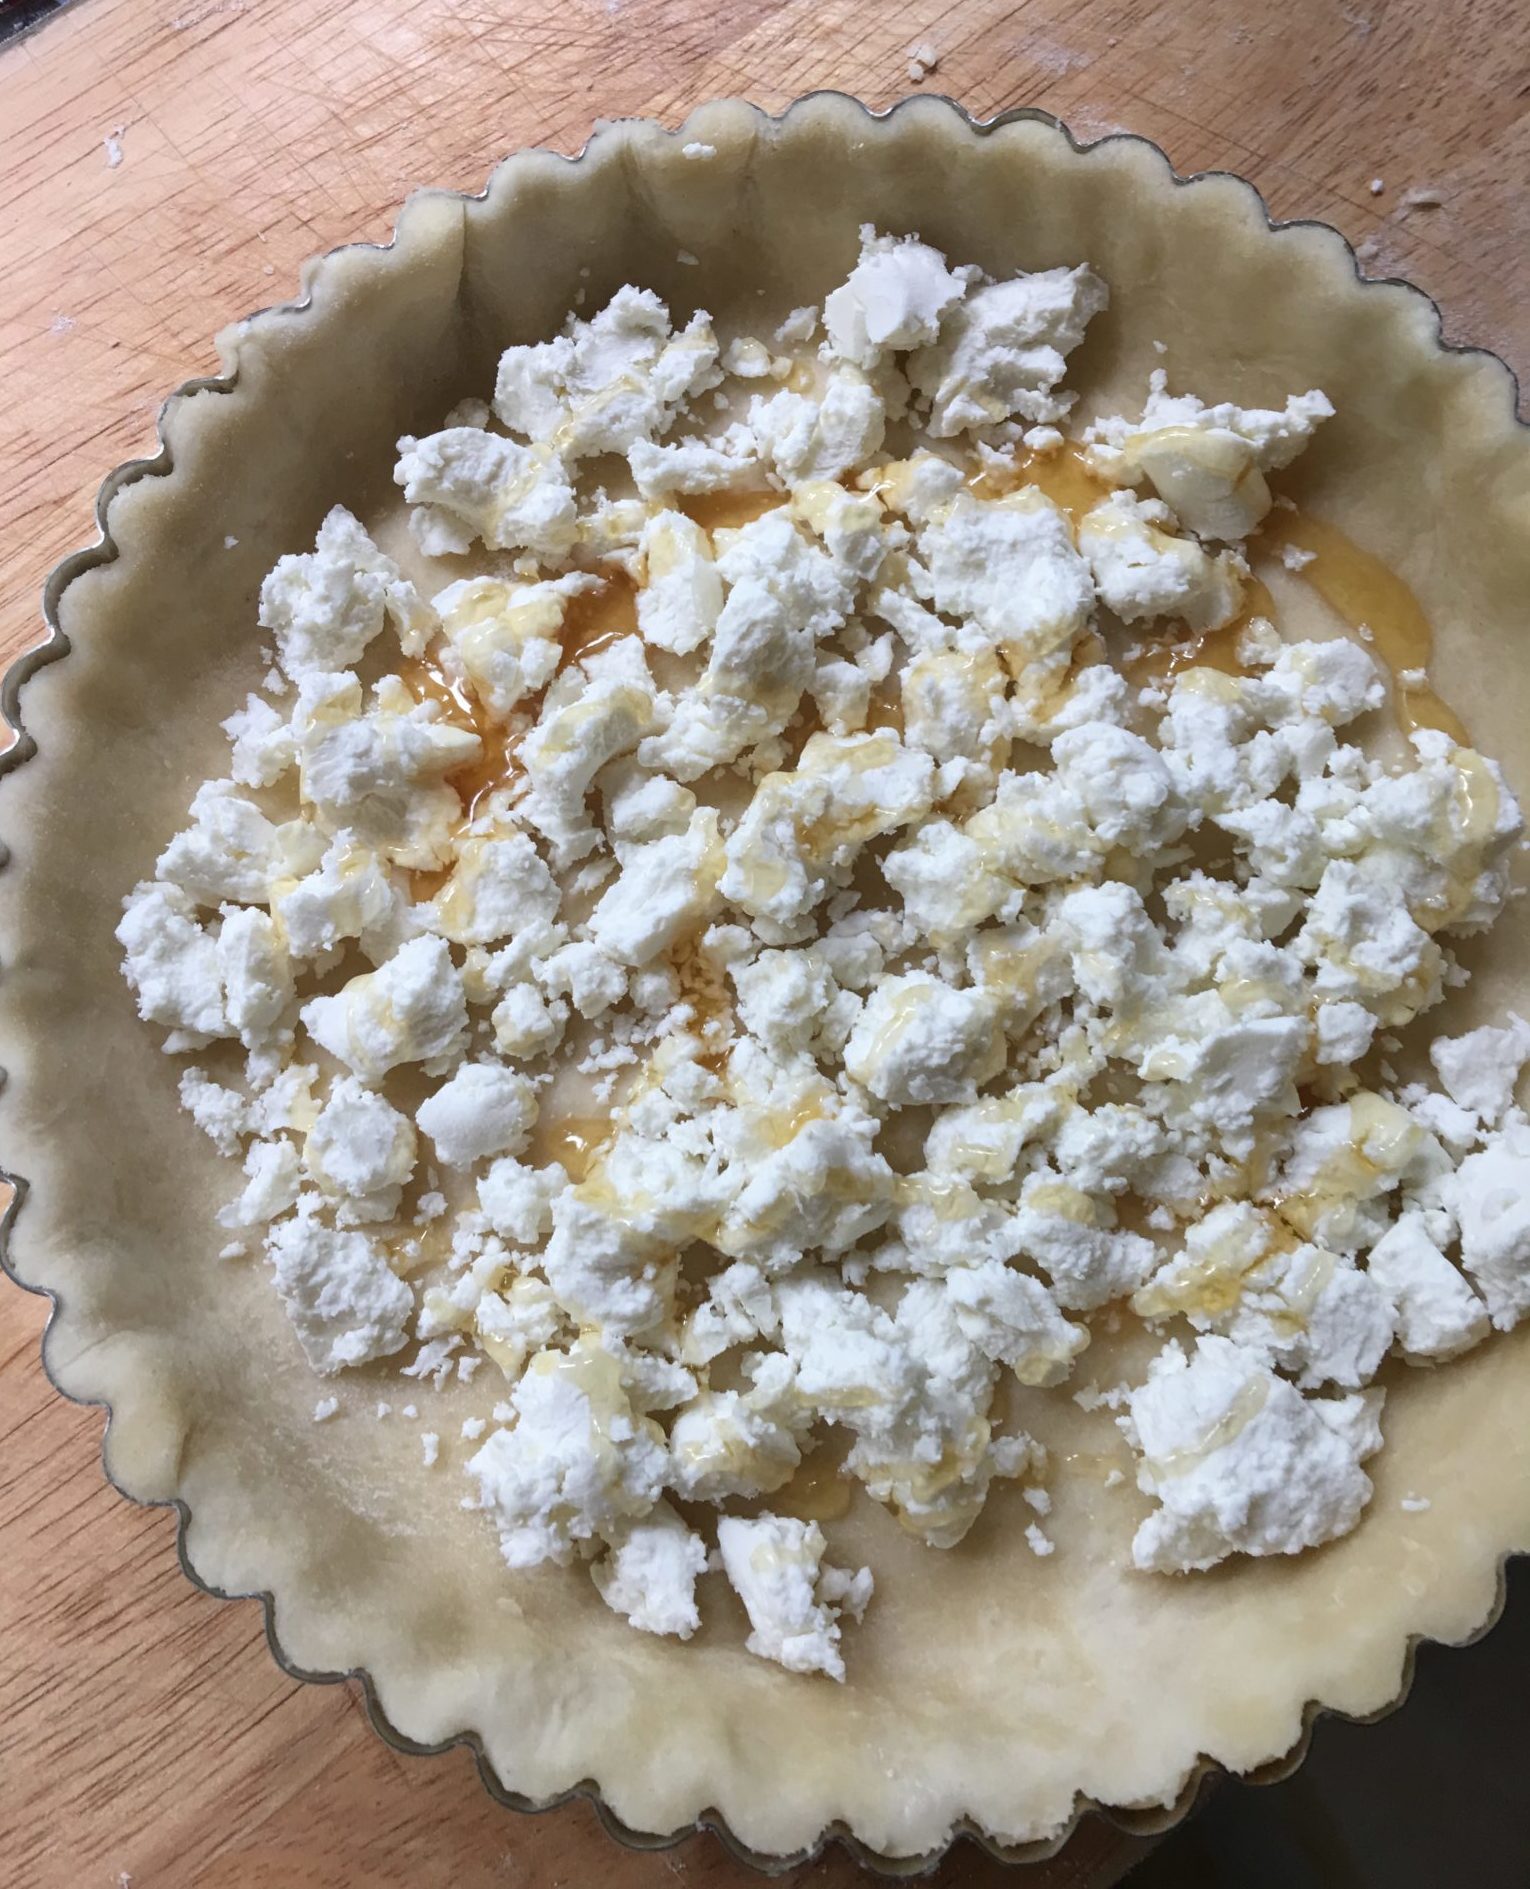 Tart tin with goat cheese and honey